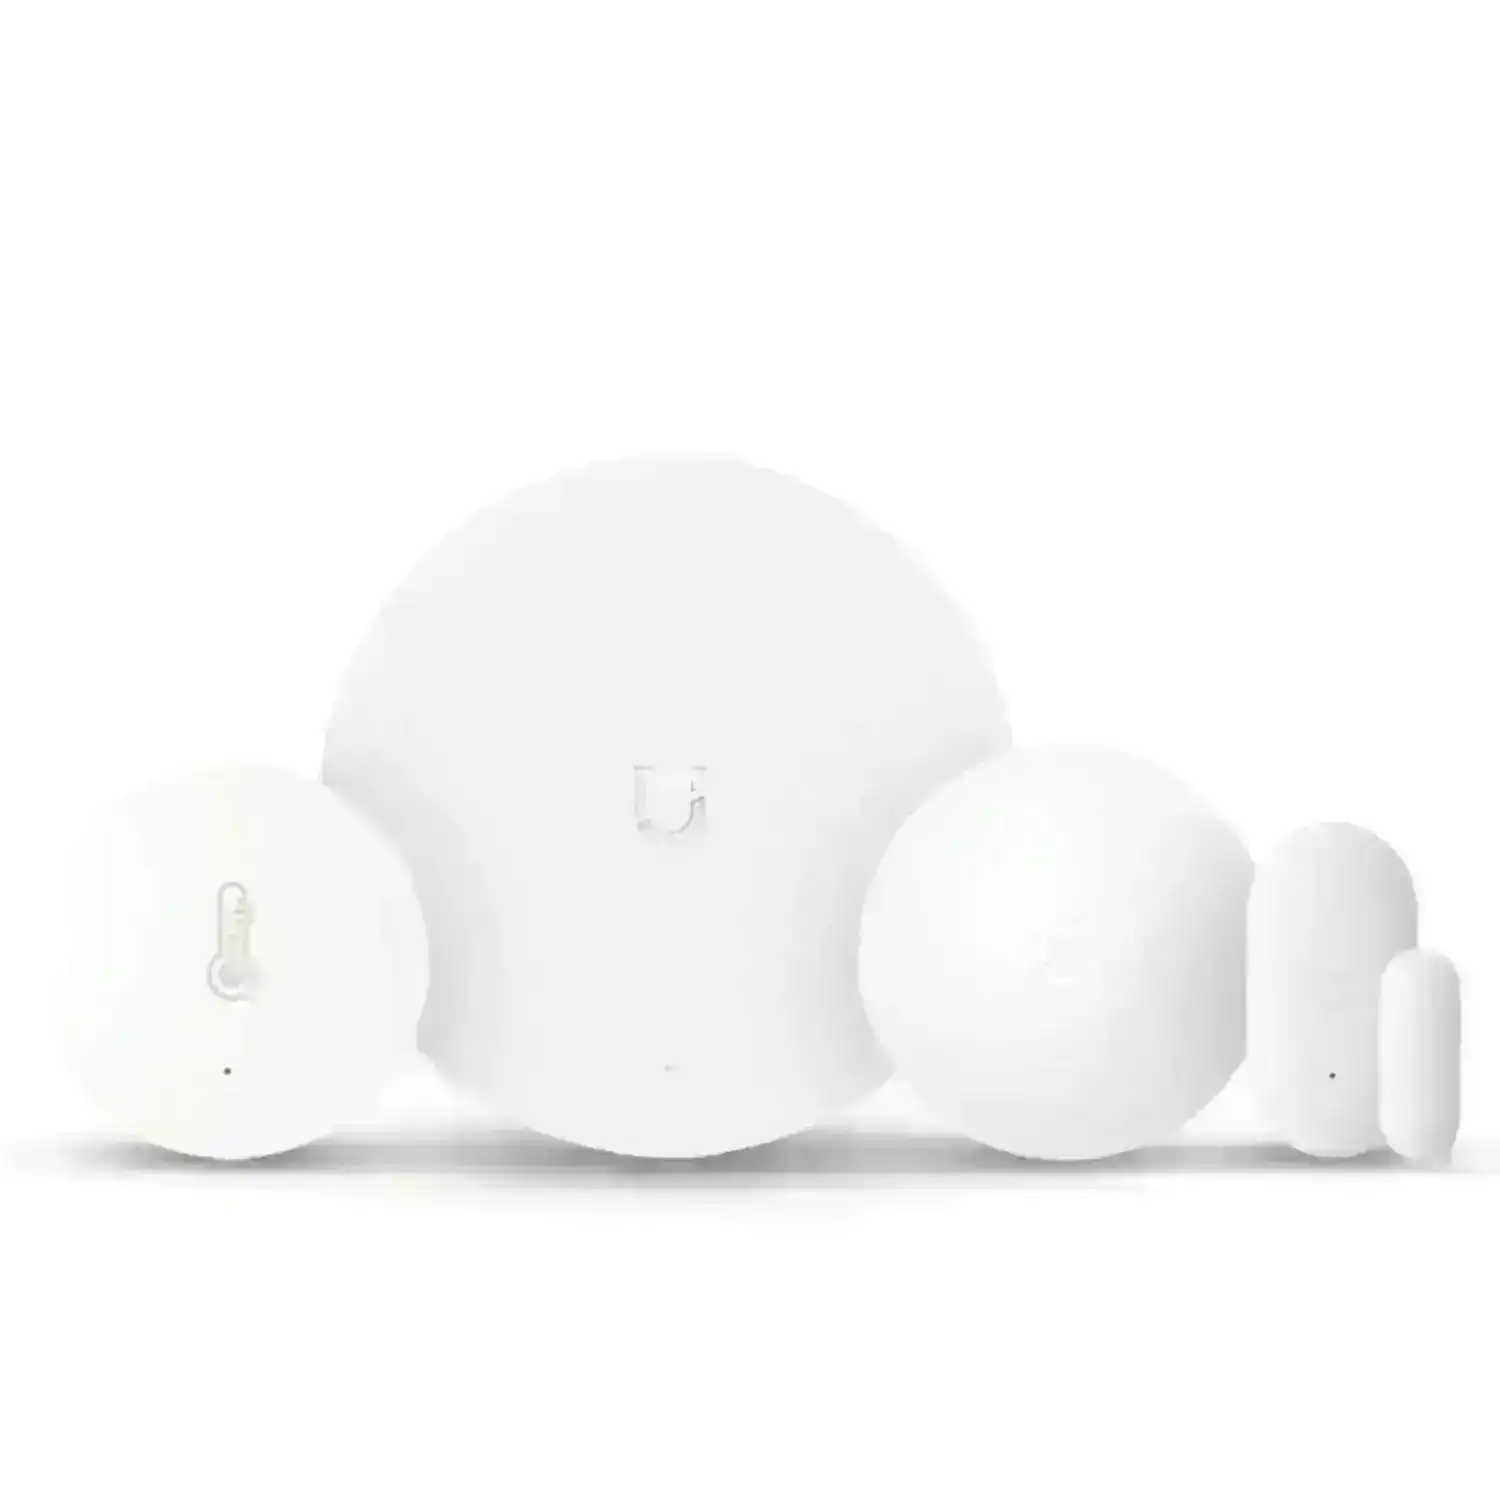 Xiaomi Mi Smart Home Starter Kit Pack Set 4 in 1 Control Center Security Monitor Devices